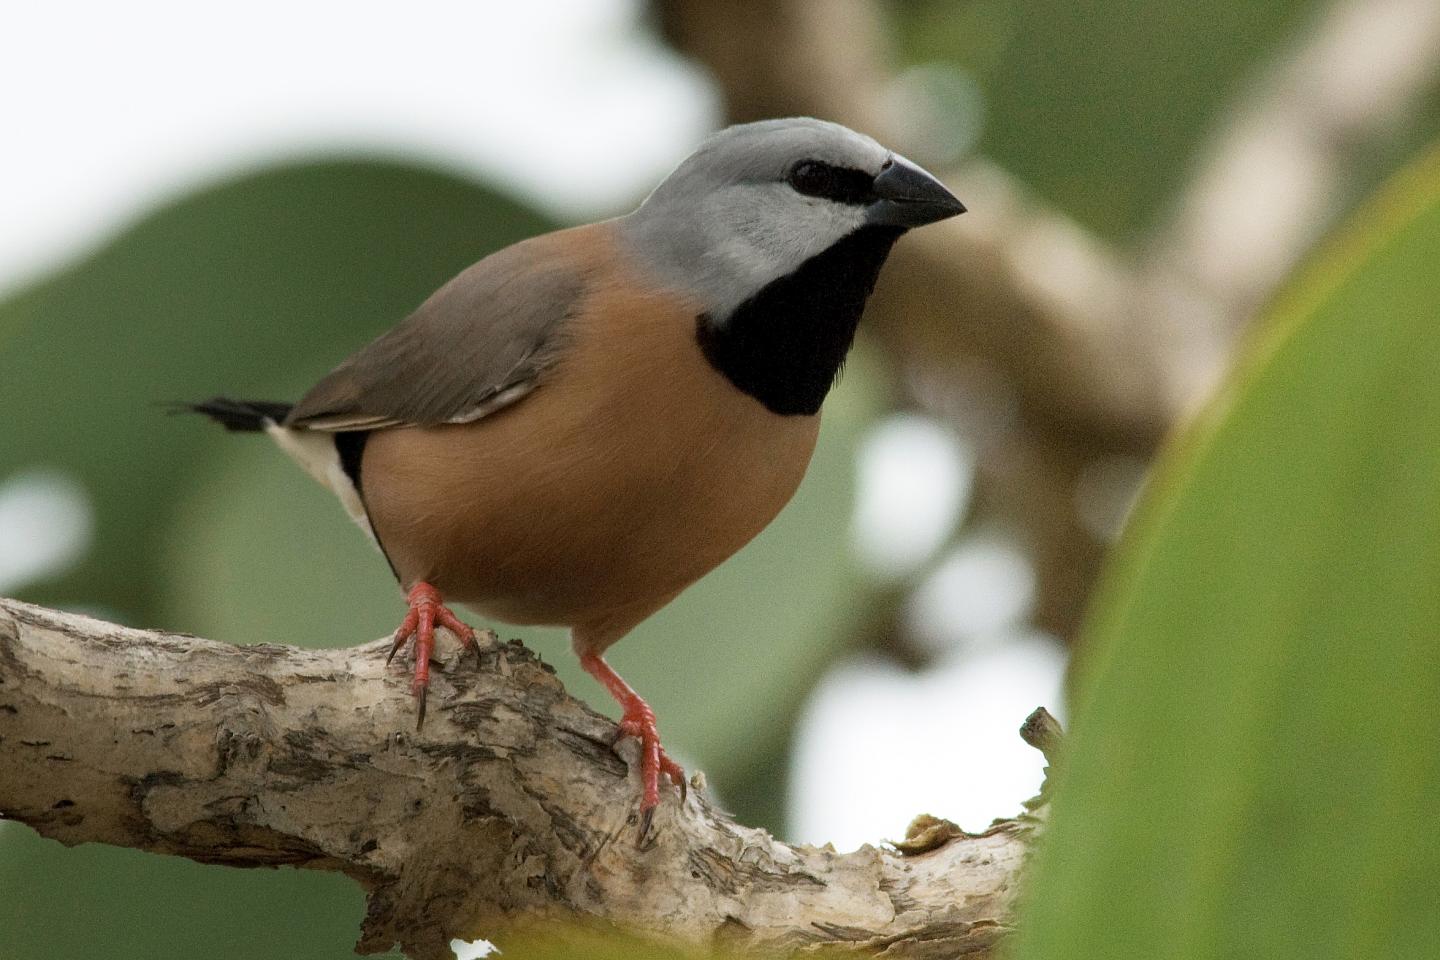 The Southern Black-Throated Finch (1 of 3)